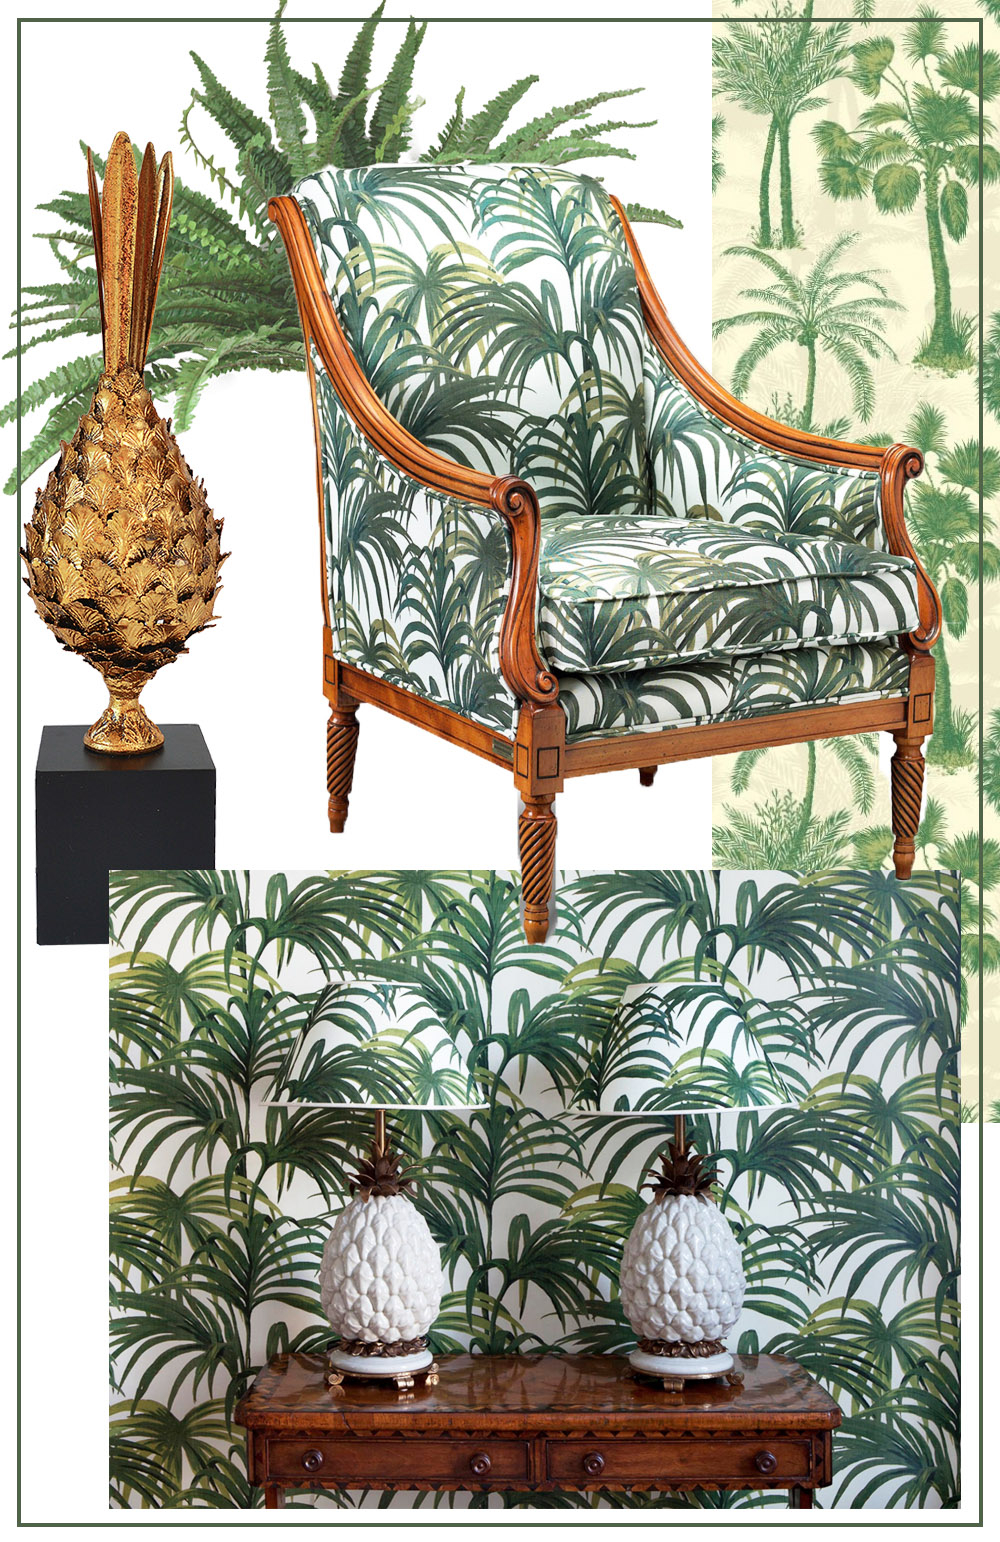 Tropical interiors is a key look for SS16. Think lush tropical greenery with colonial rattan- MiaFleur